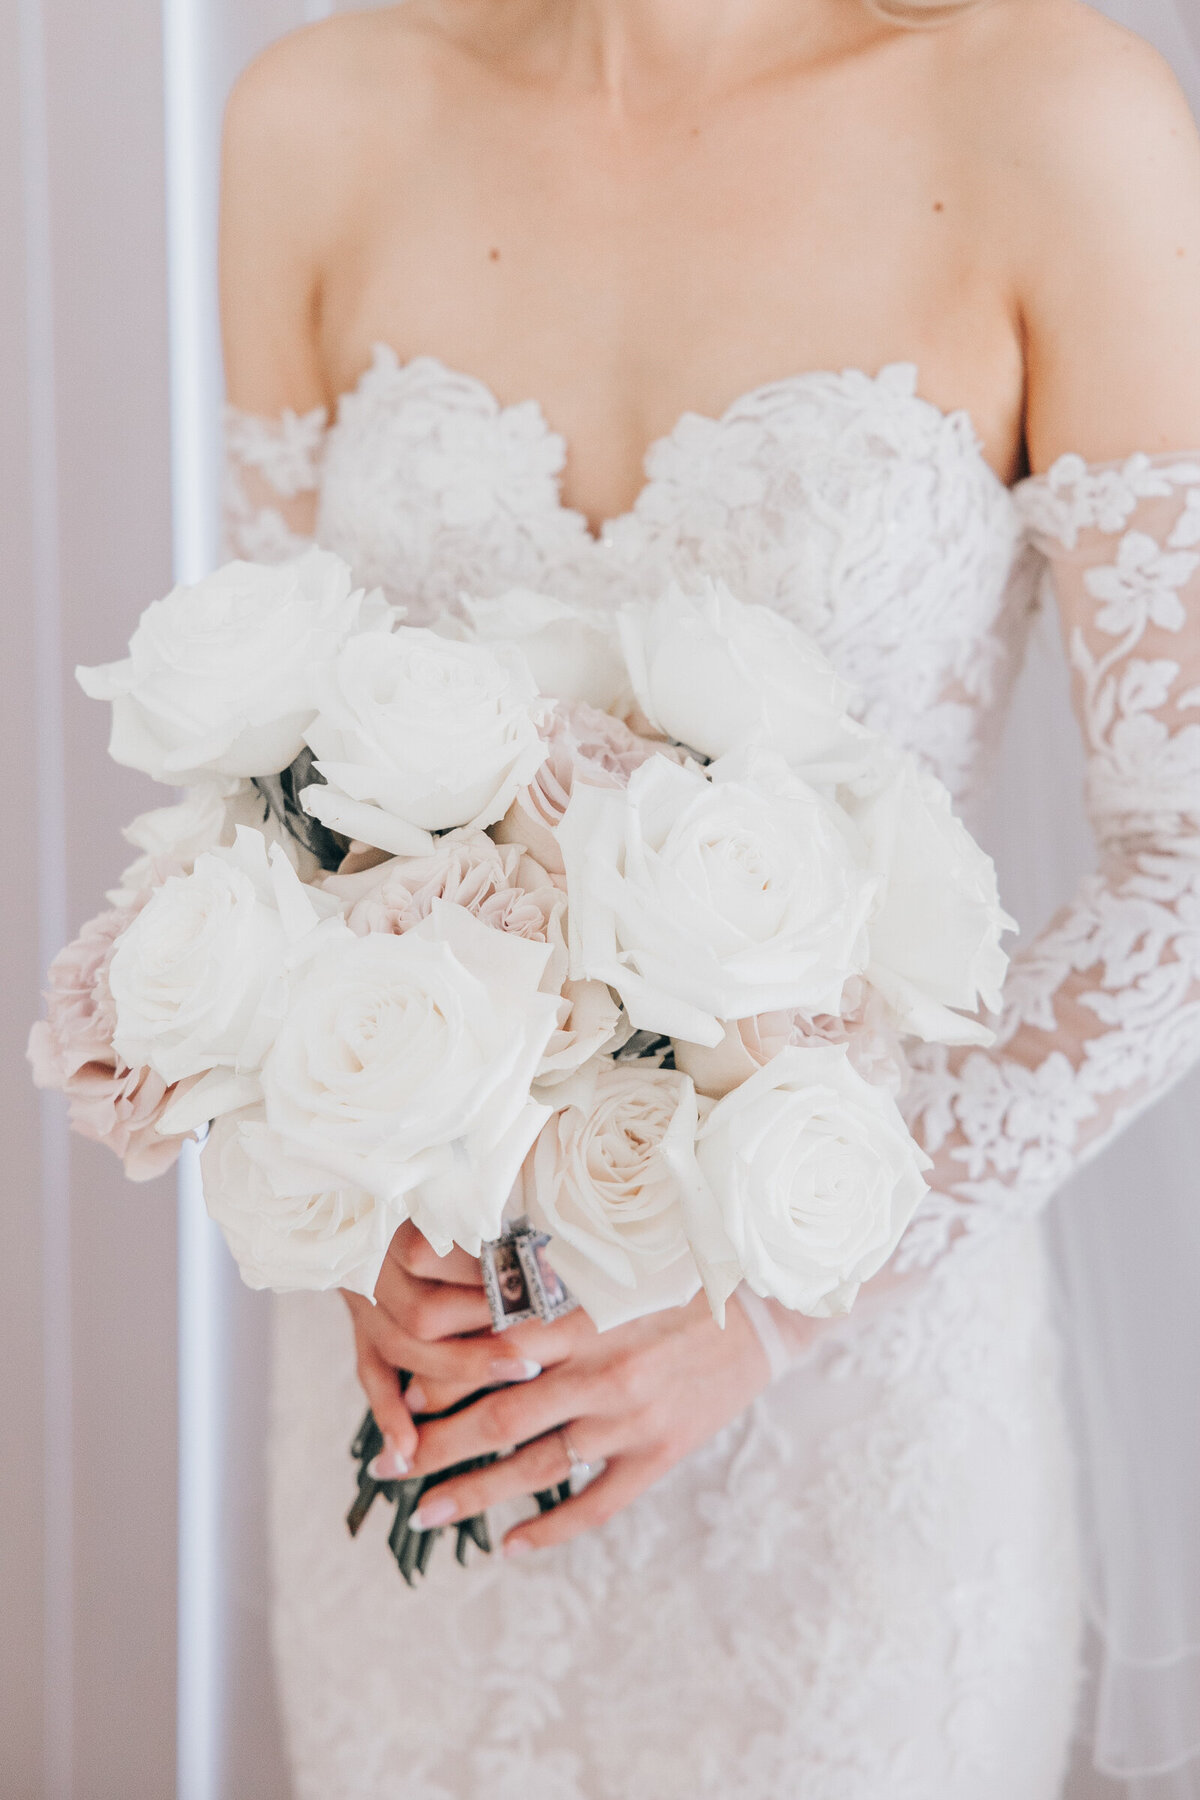 Glamorous white and pink wedding florals photographed by Nova Markina